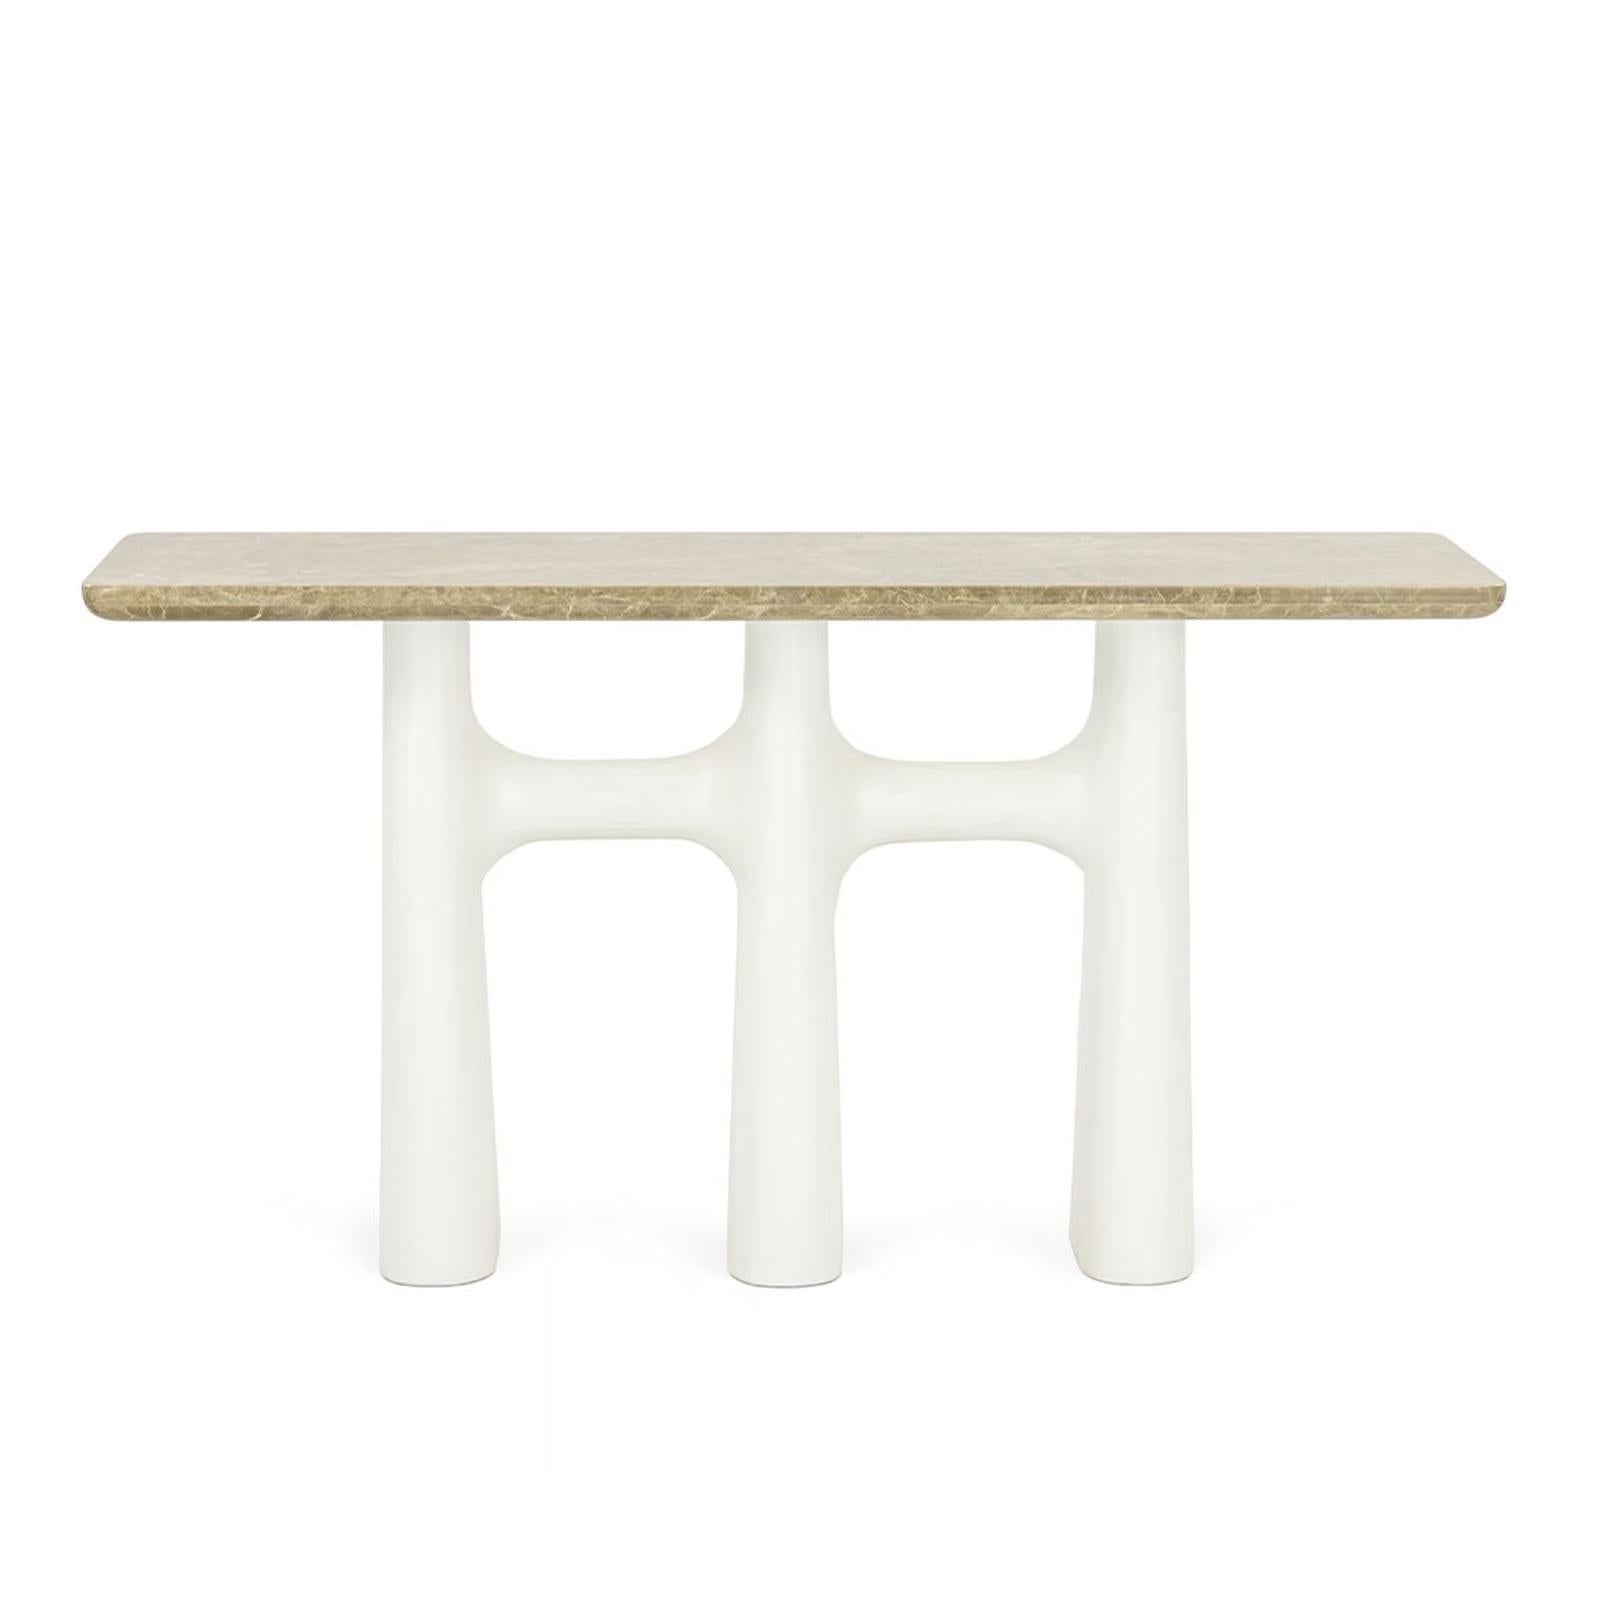 This elegant console features a marble tabletop with veins of brown, cream, and gold. The tabletop rests on three organic-shaped, creamy white plaster legs with a slightly textured surface. The legs curve inwards at the bottom, adding a touch of